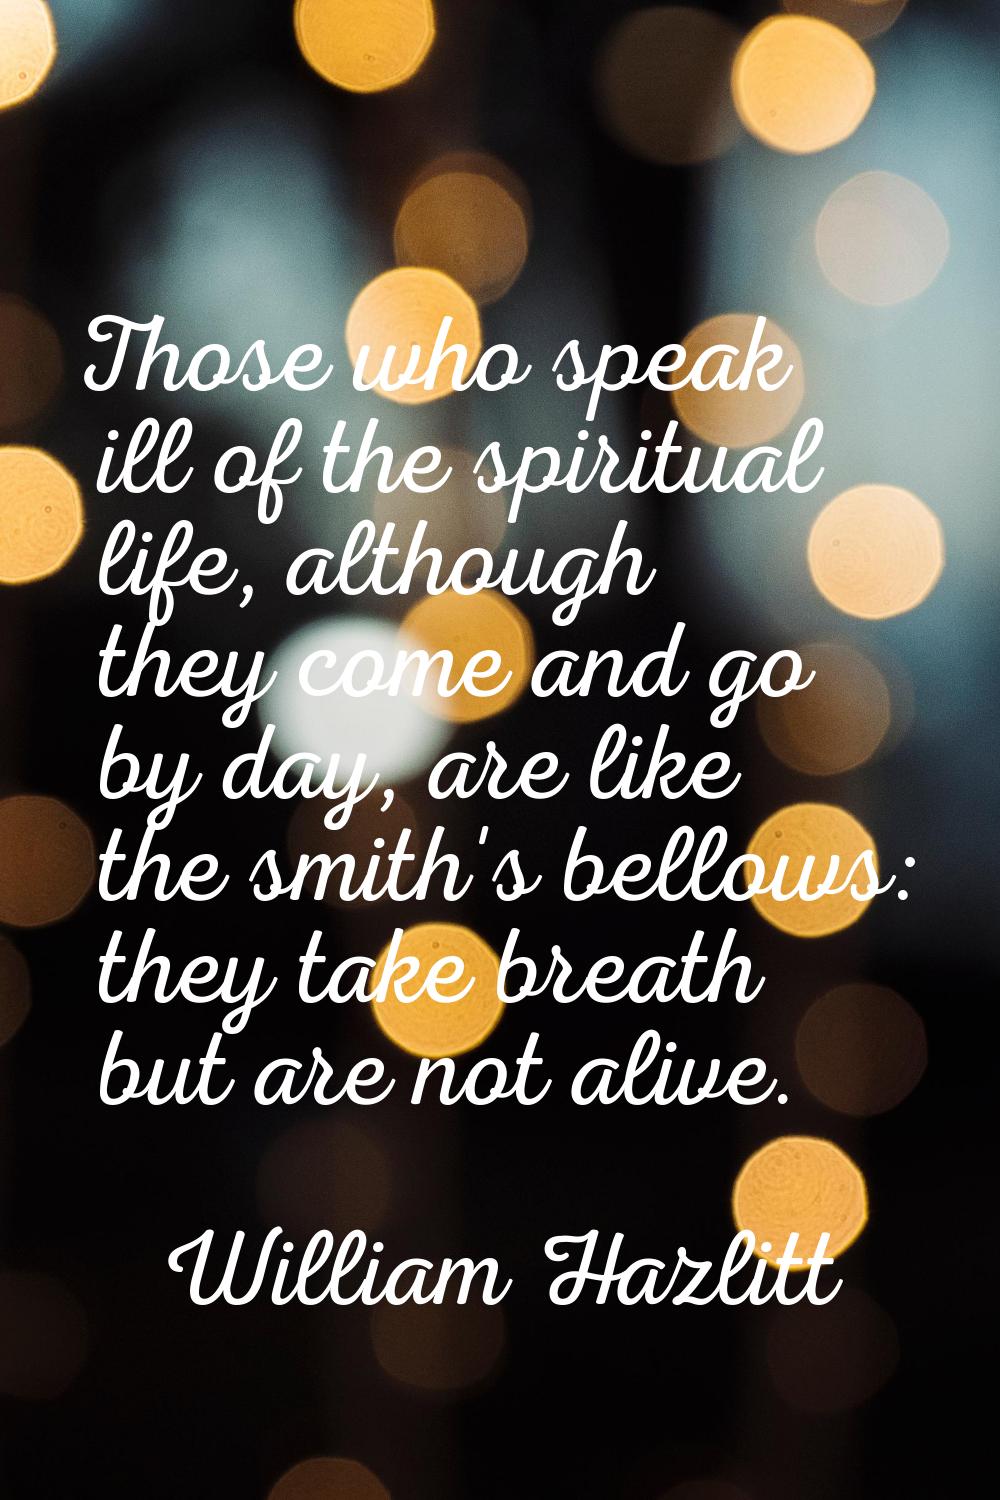 Those who speak ill of the spiritual life, although they come and go by day, are like the smith's b